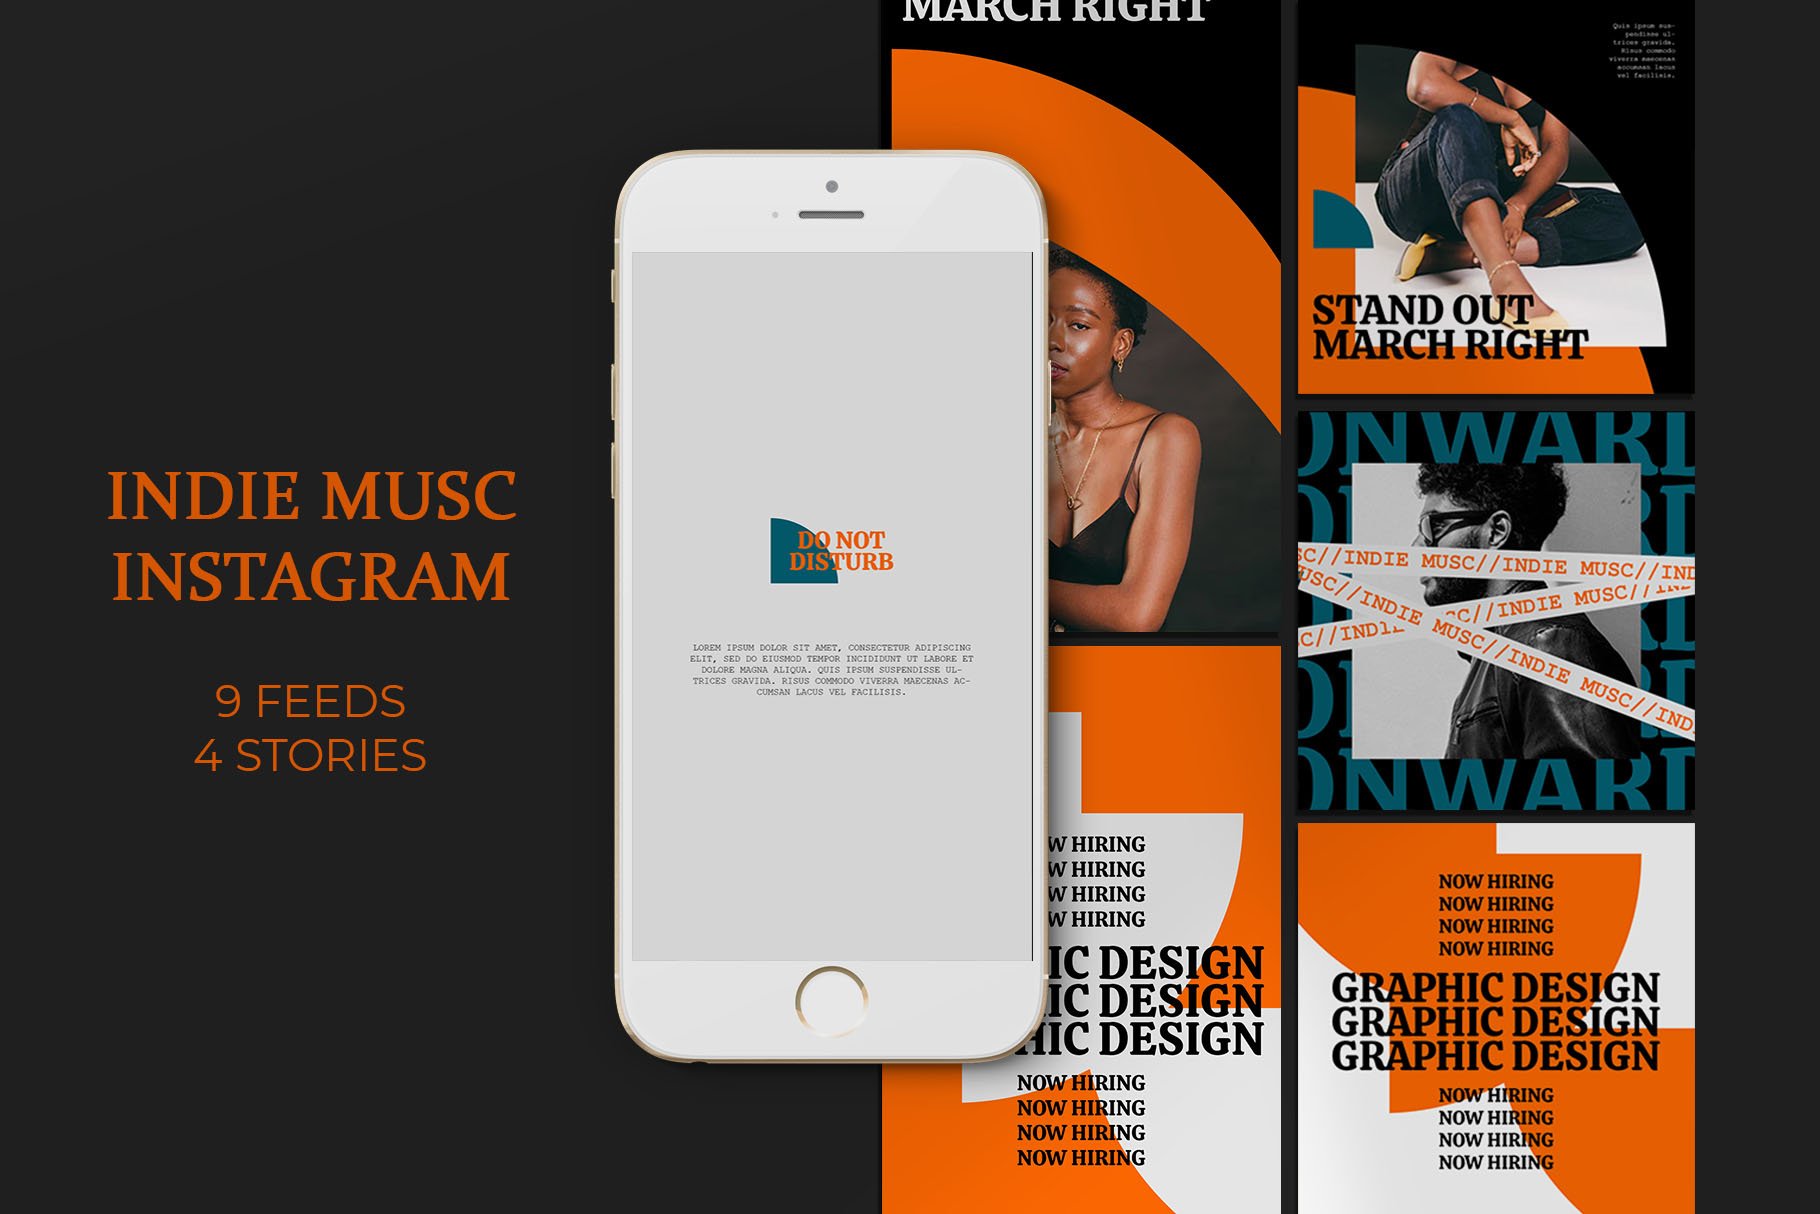 Indie Musc Instagram Templates cover image.